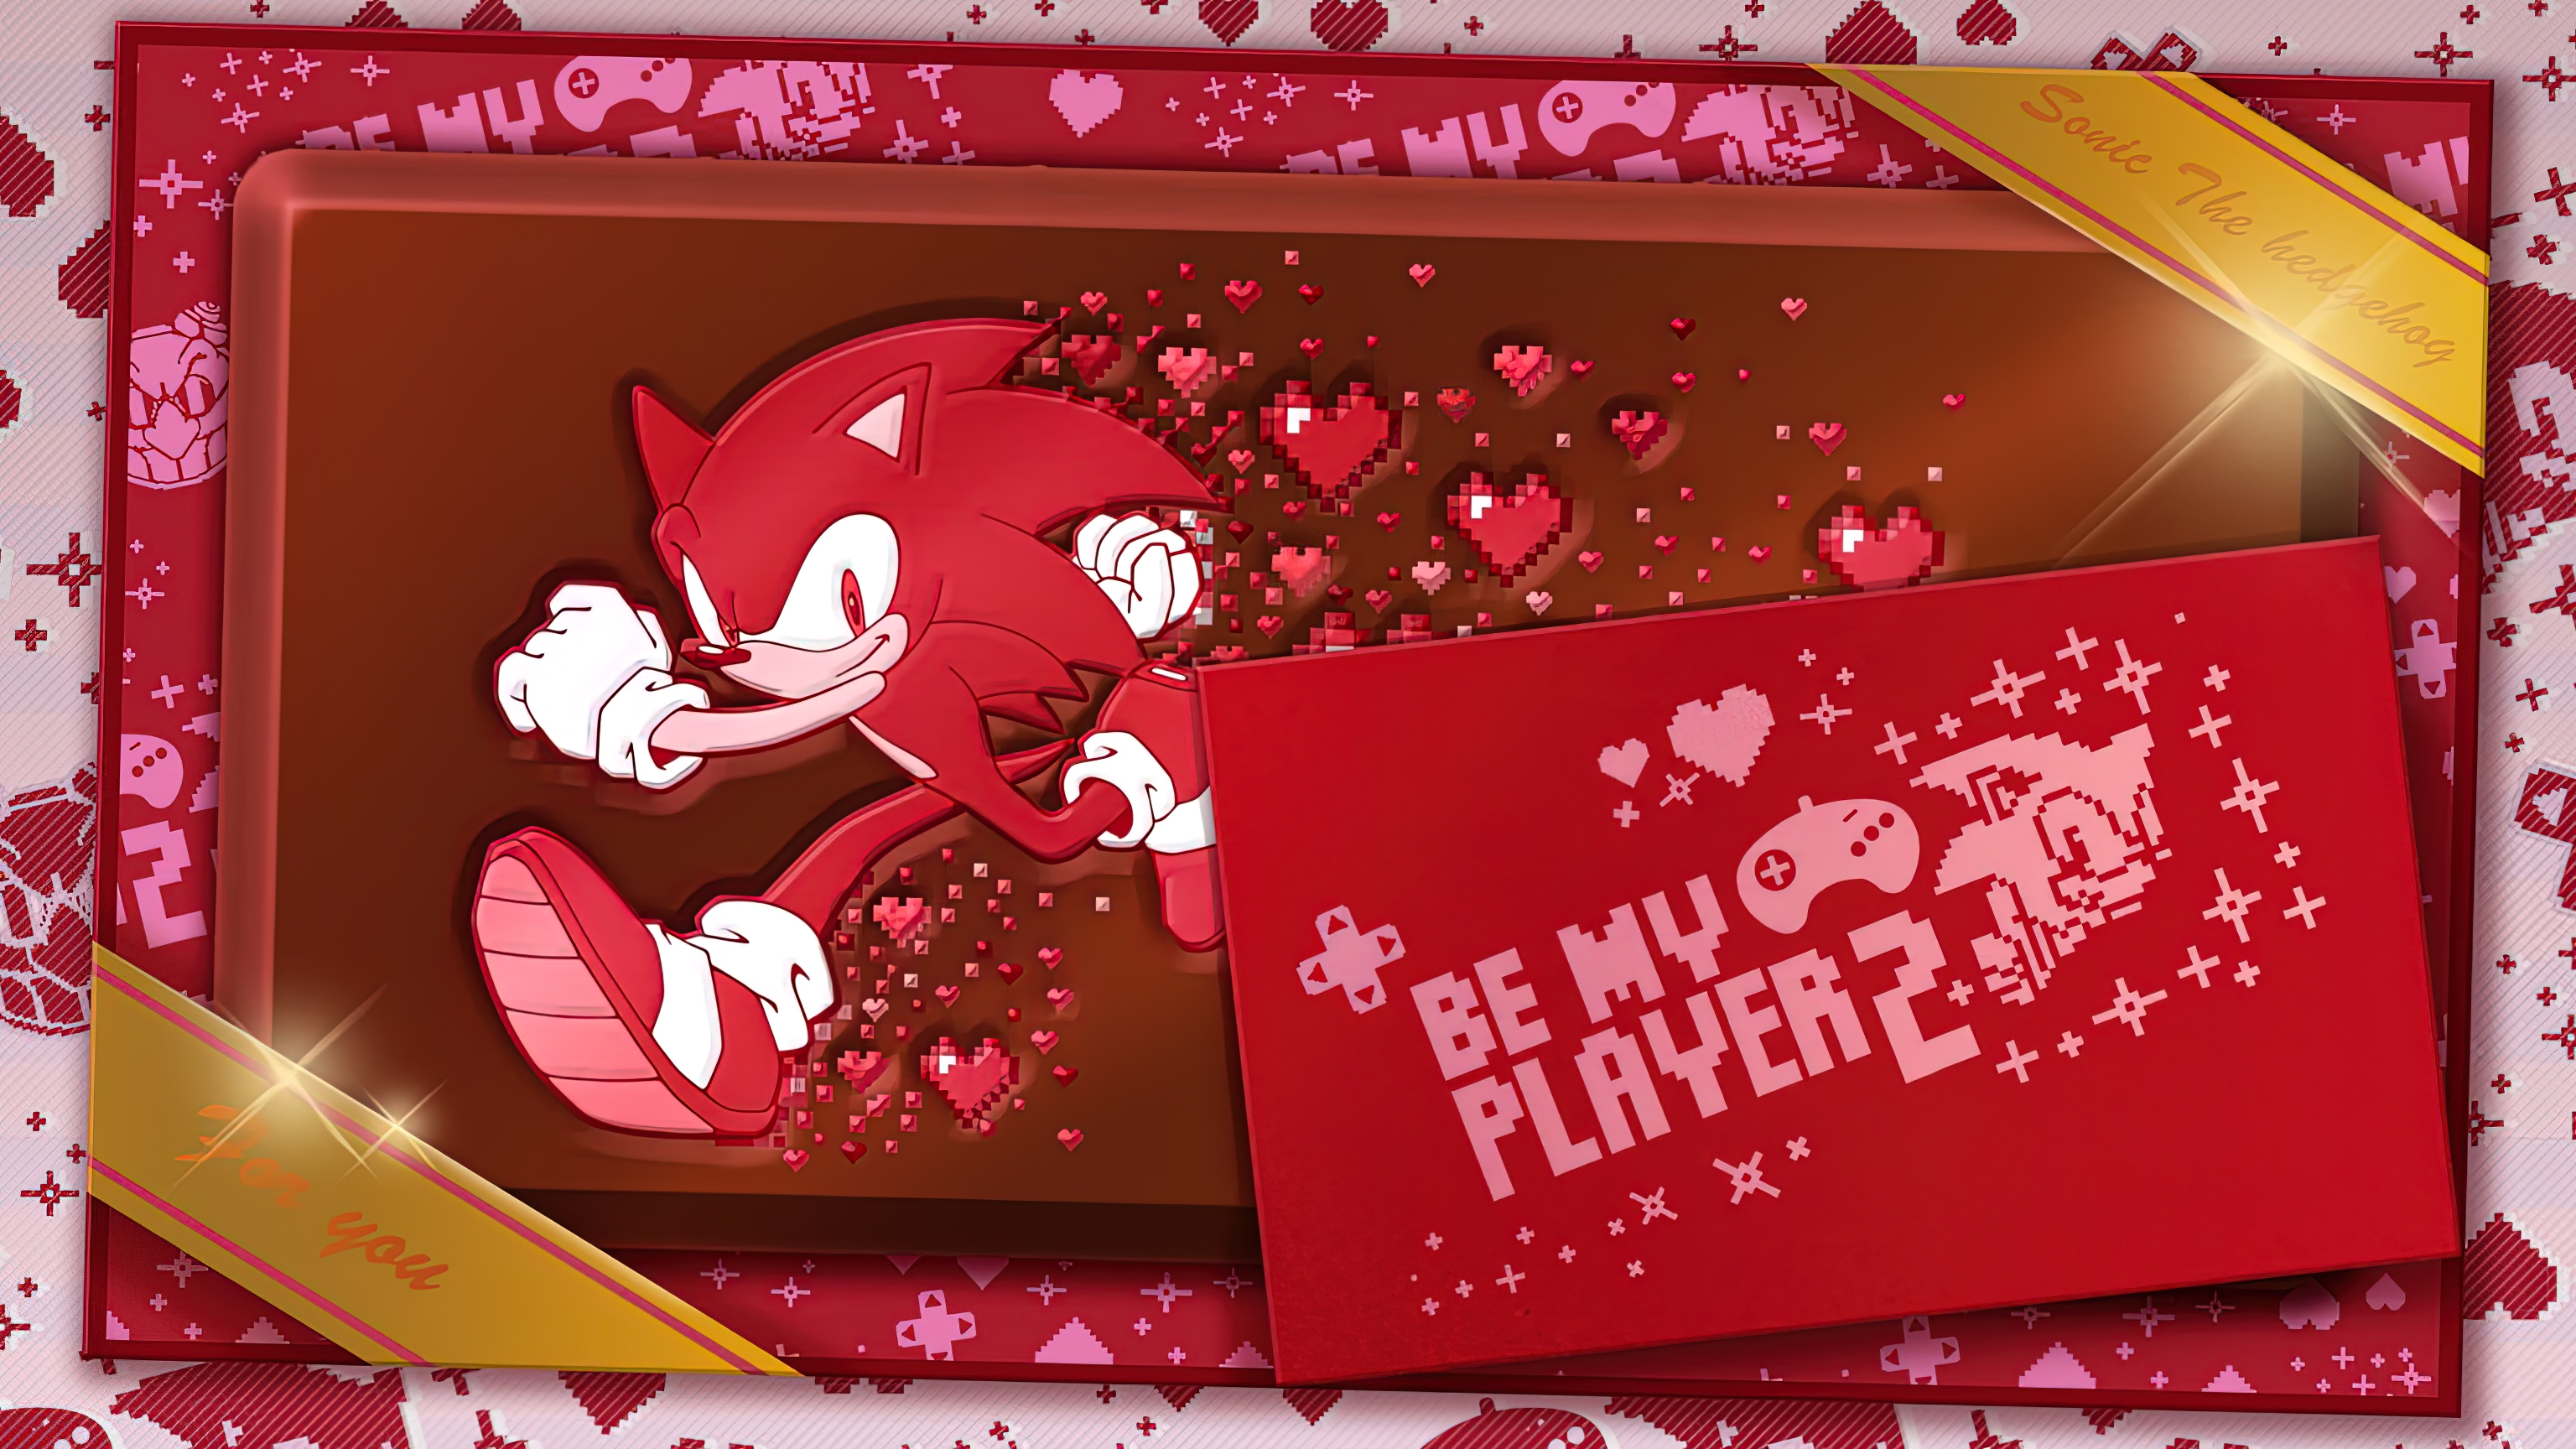 General 3072x1728 Sonic Sonic the Hedgehog Yui Karasuno artwork video game art Sega PC gaming video game characters video games Valentine's Day cards red background